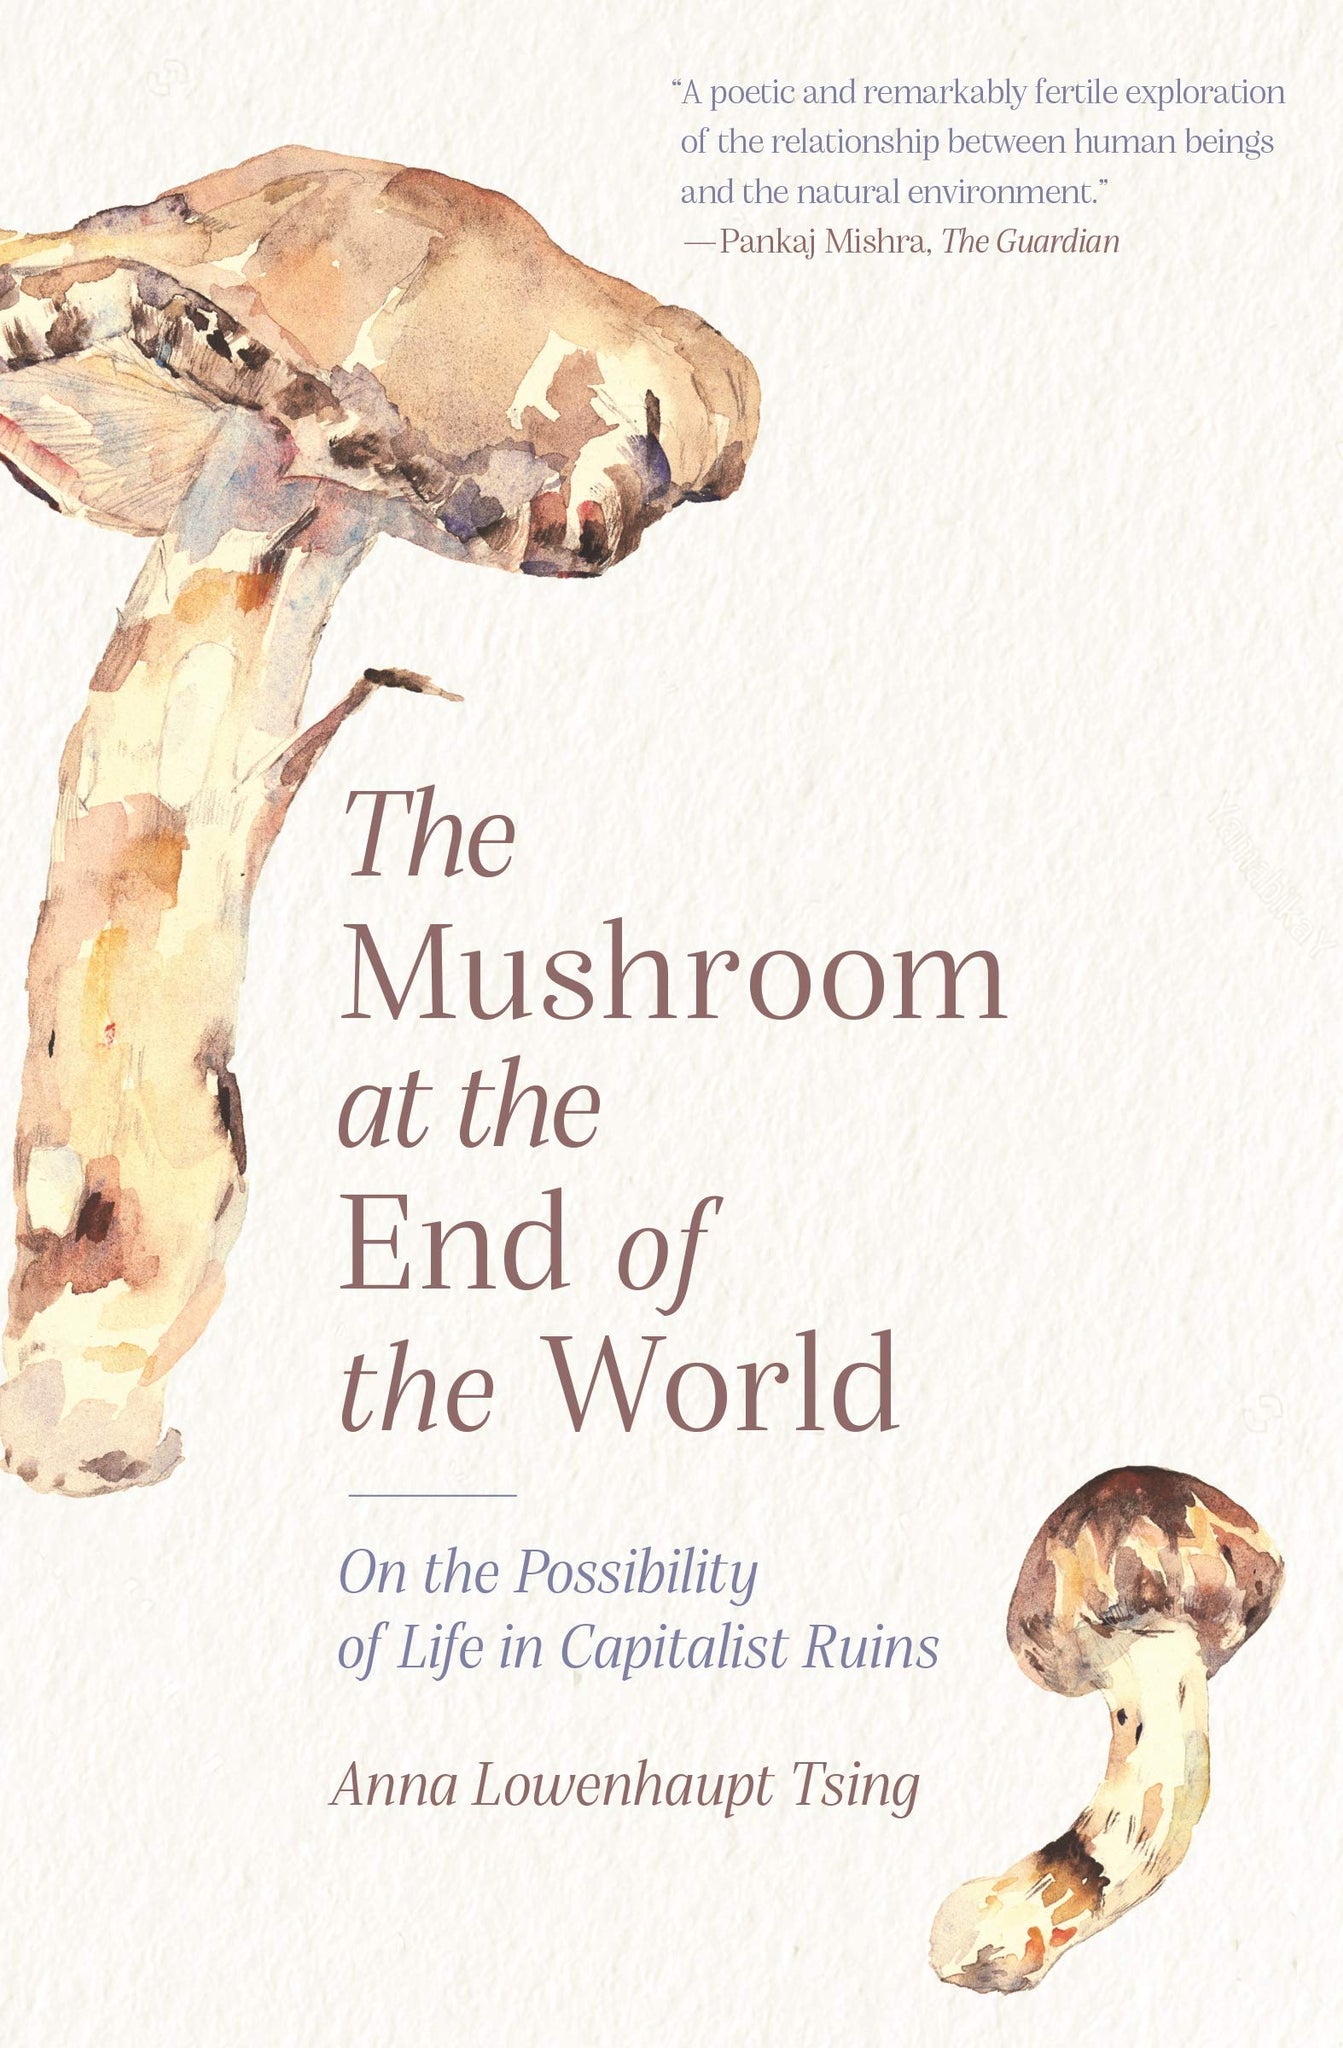 The Mushroom at the End of the World : On the Possibility of Life in Capitalist Ruins by Anna Lowenhaupt Tsing